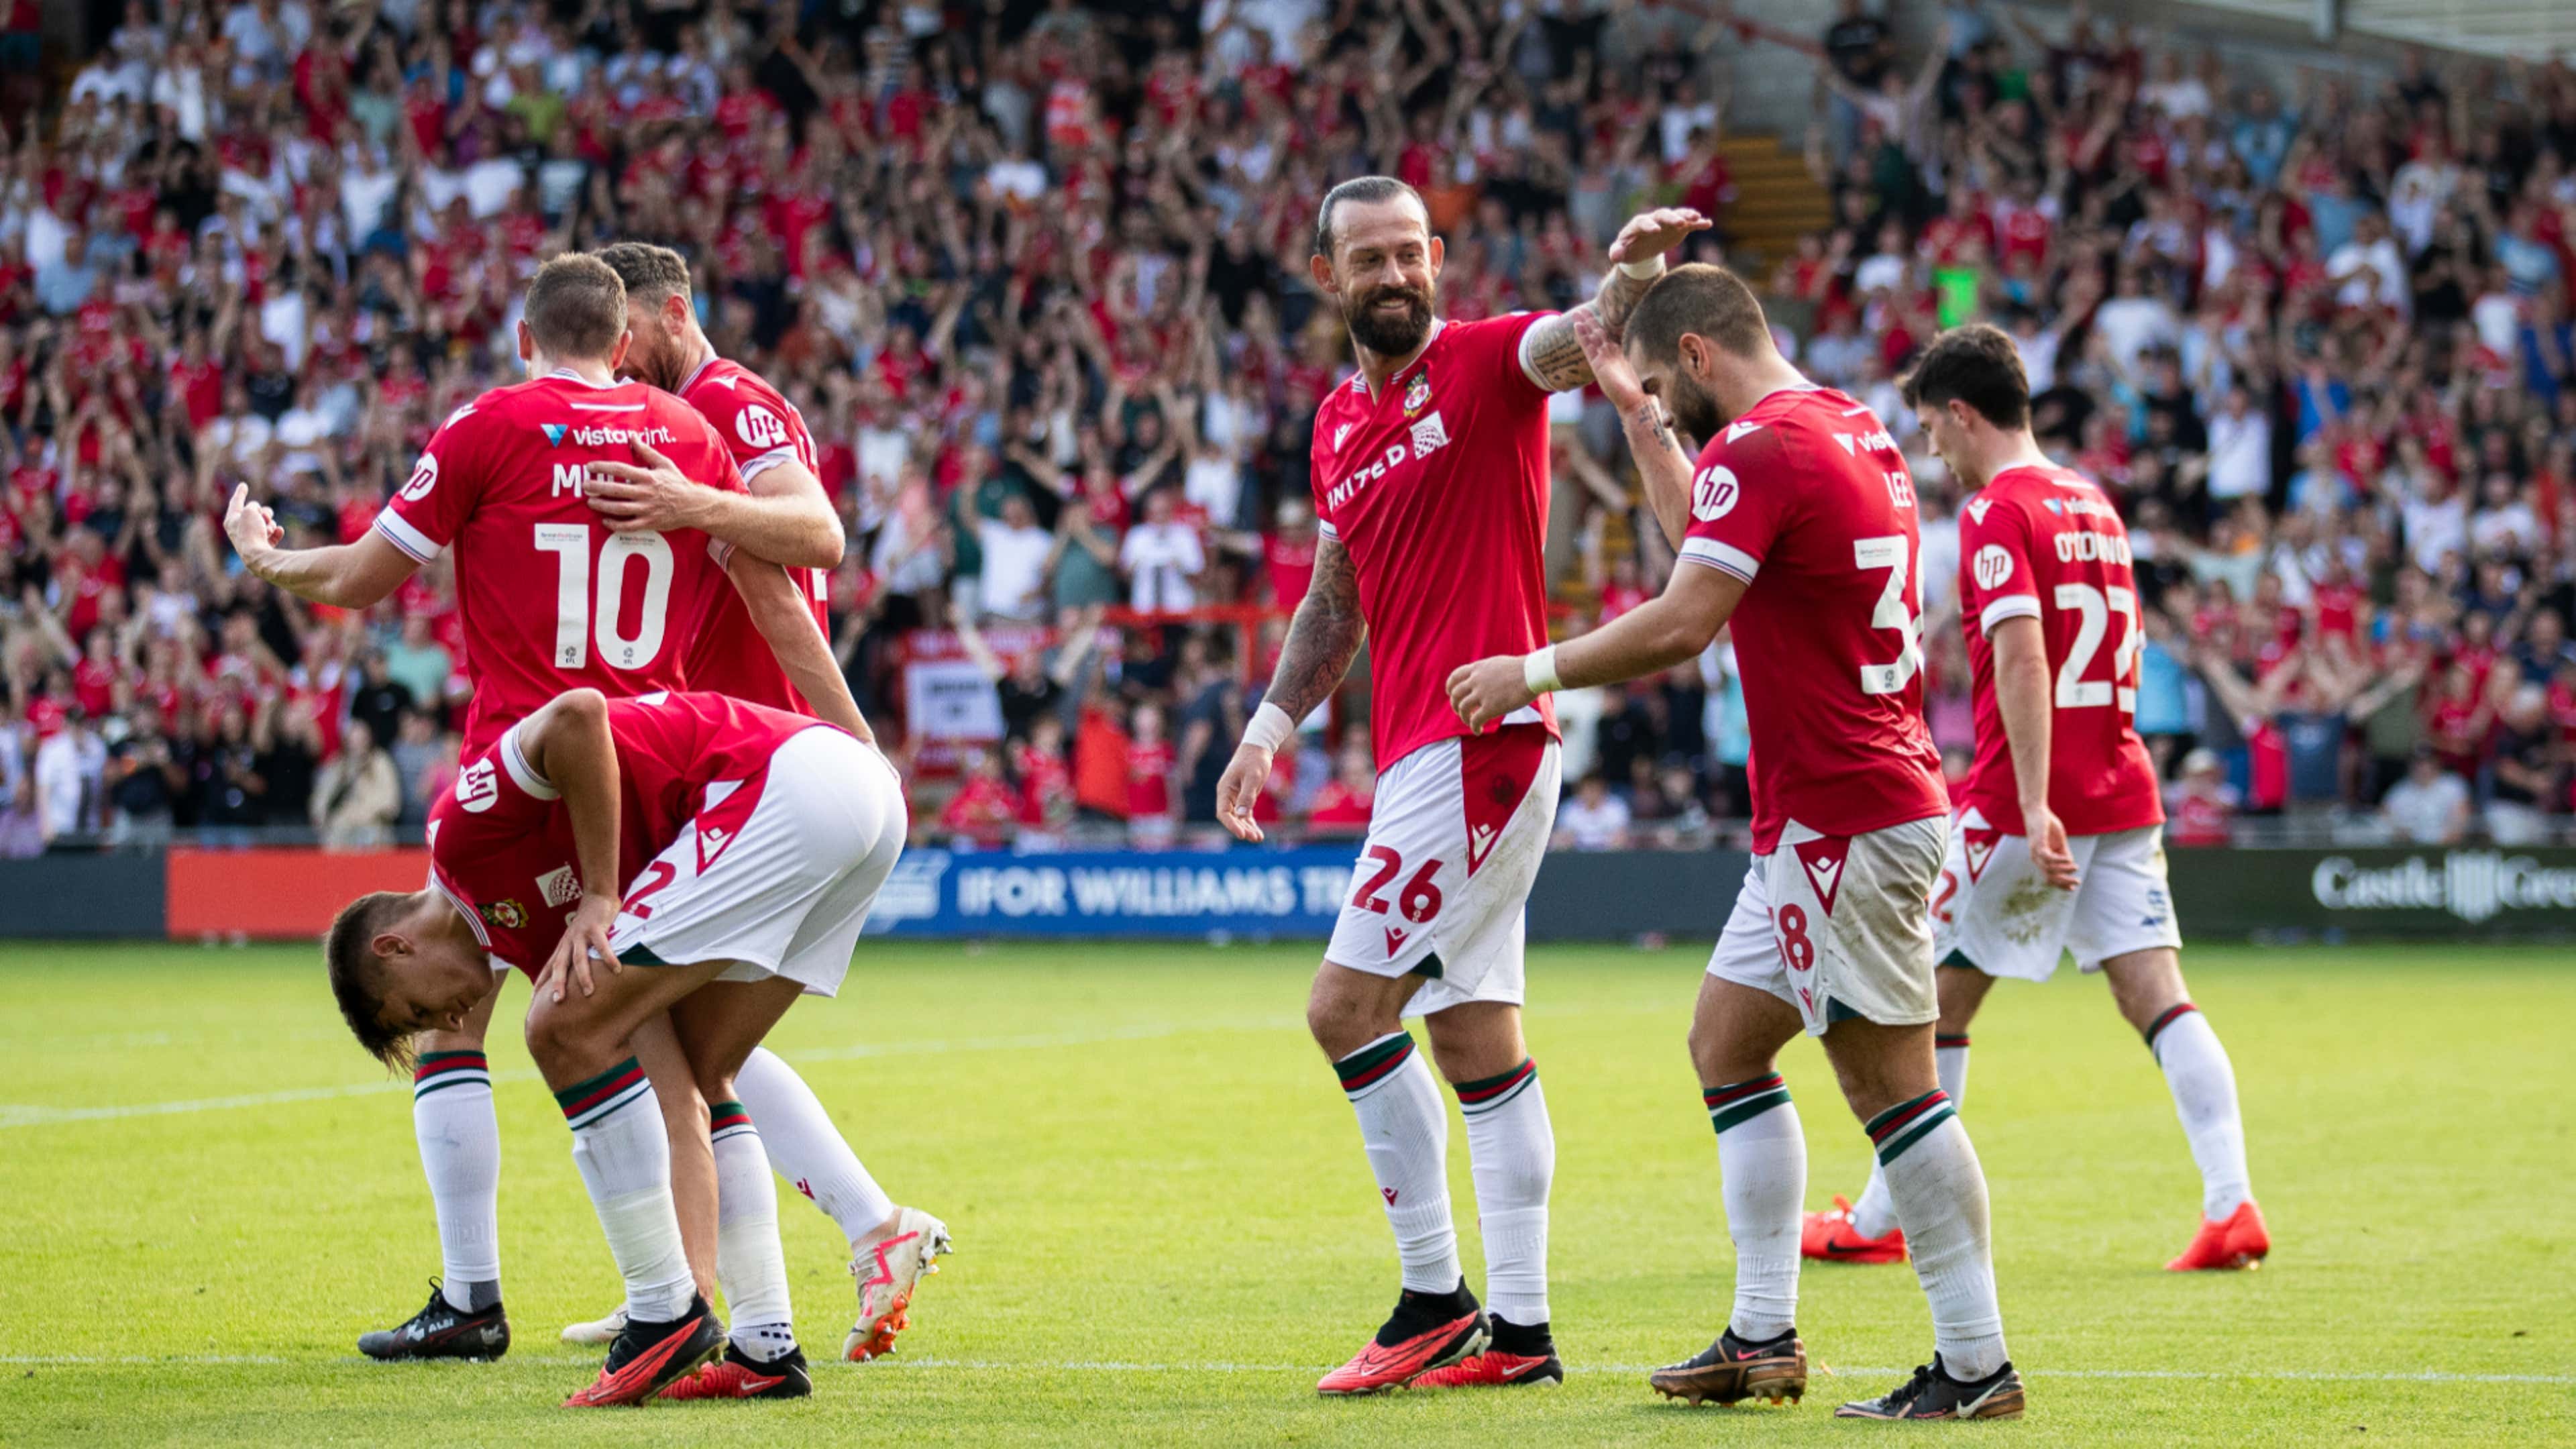 Wrexham have made a strong start to the League Two season.